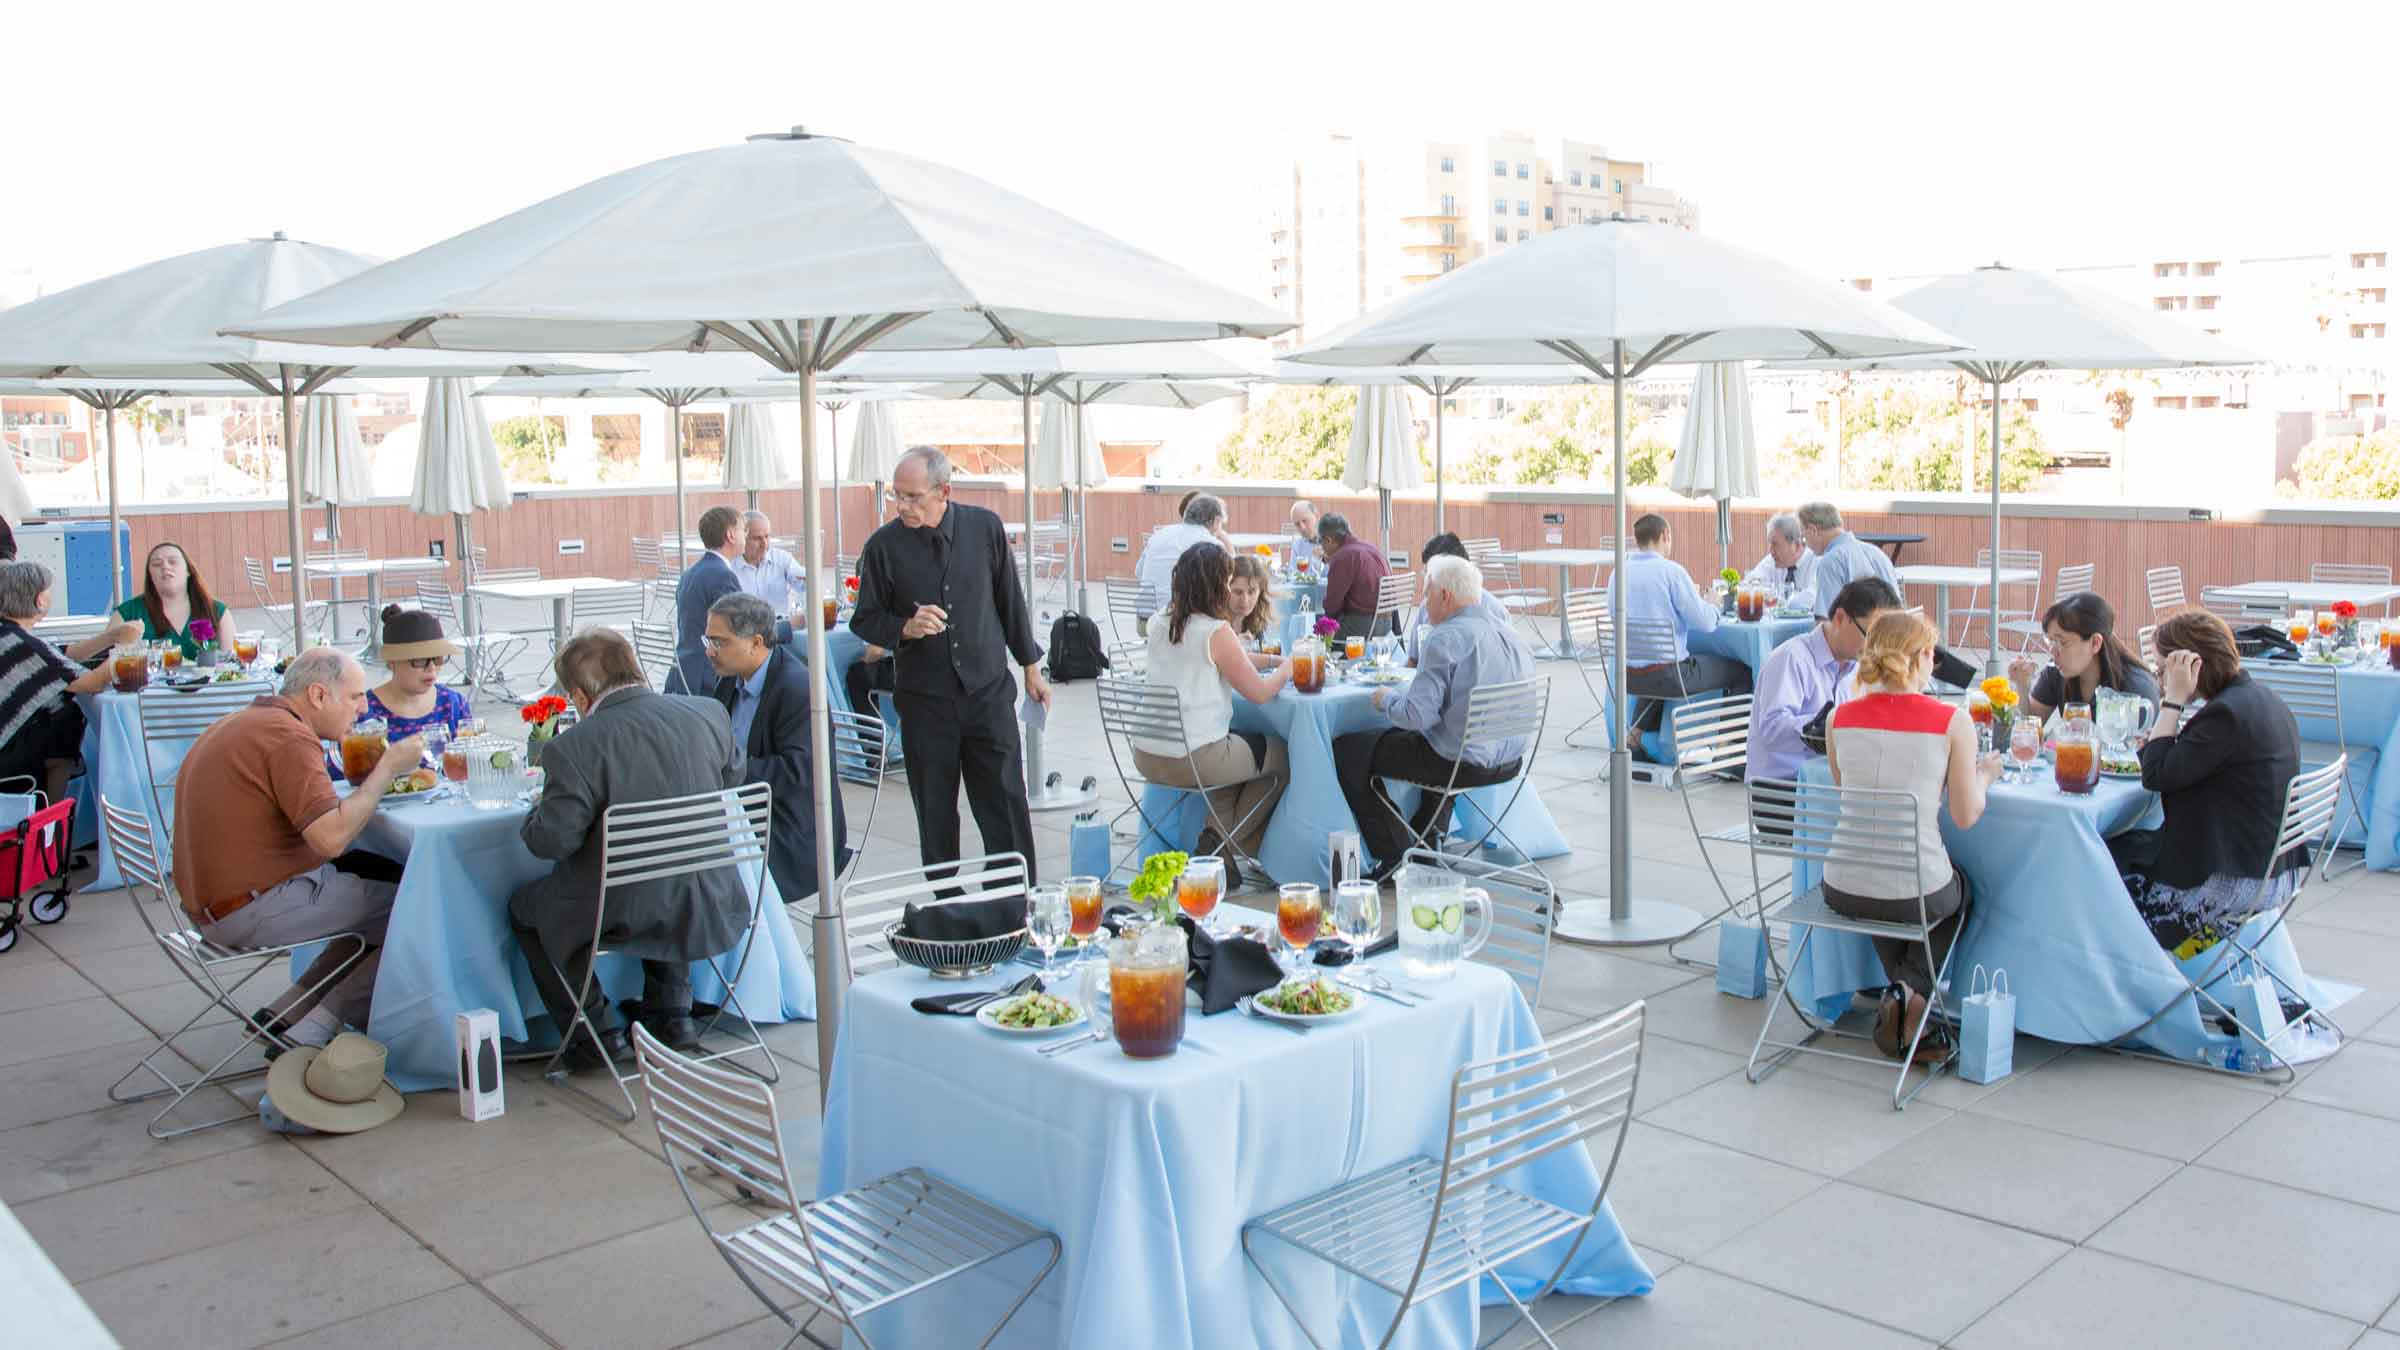 A group of about 40 ASU Engineering faculty sit outdoors around tables eating at an event.